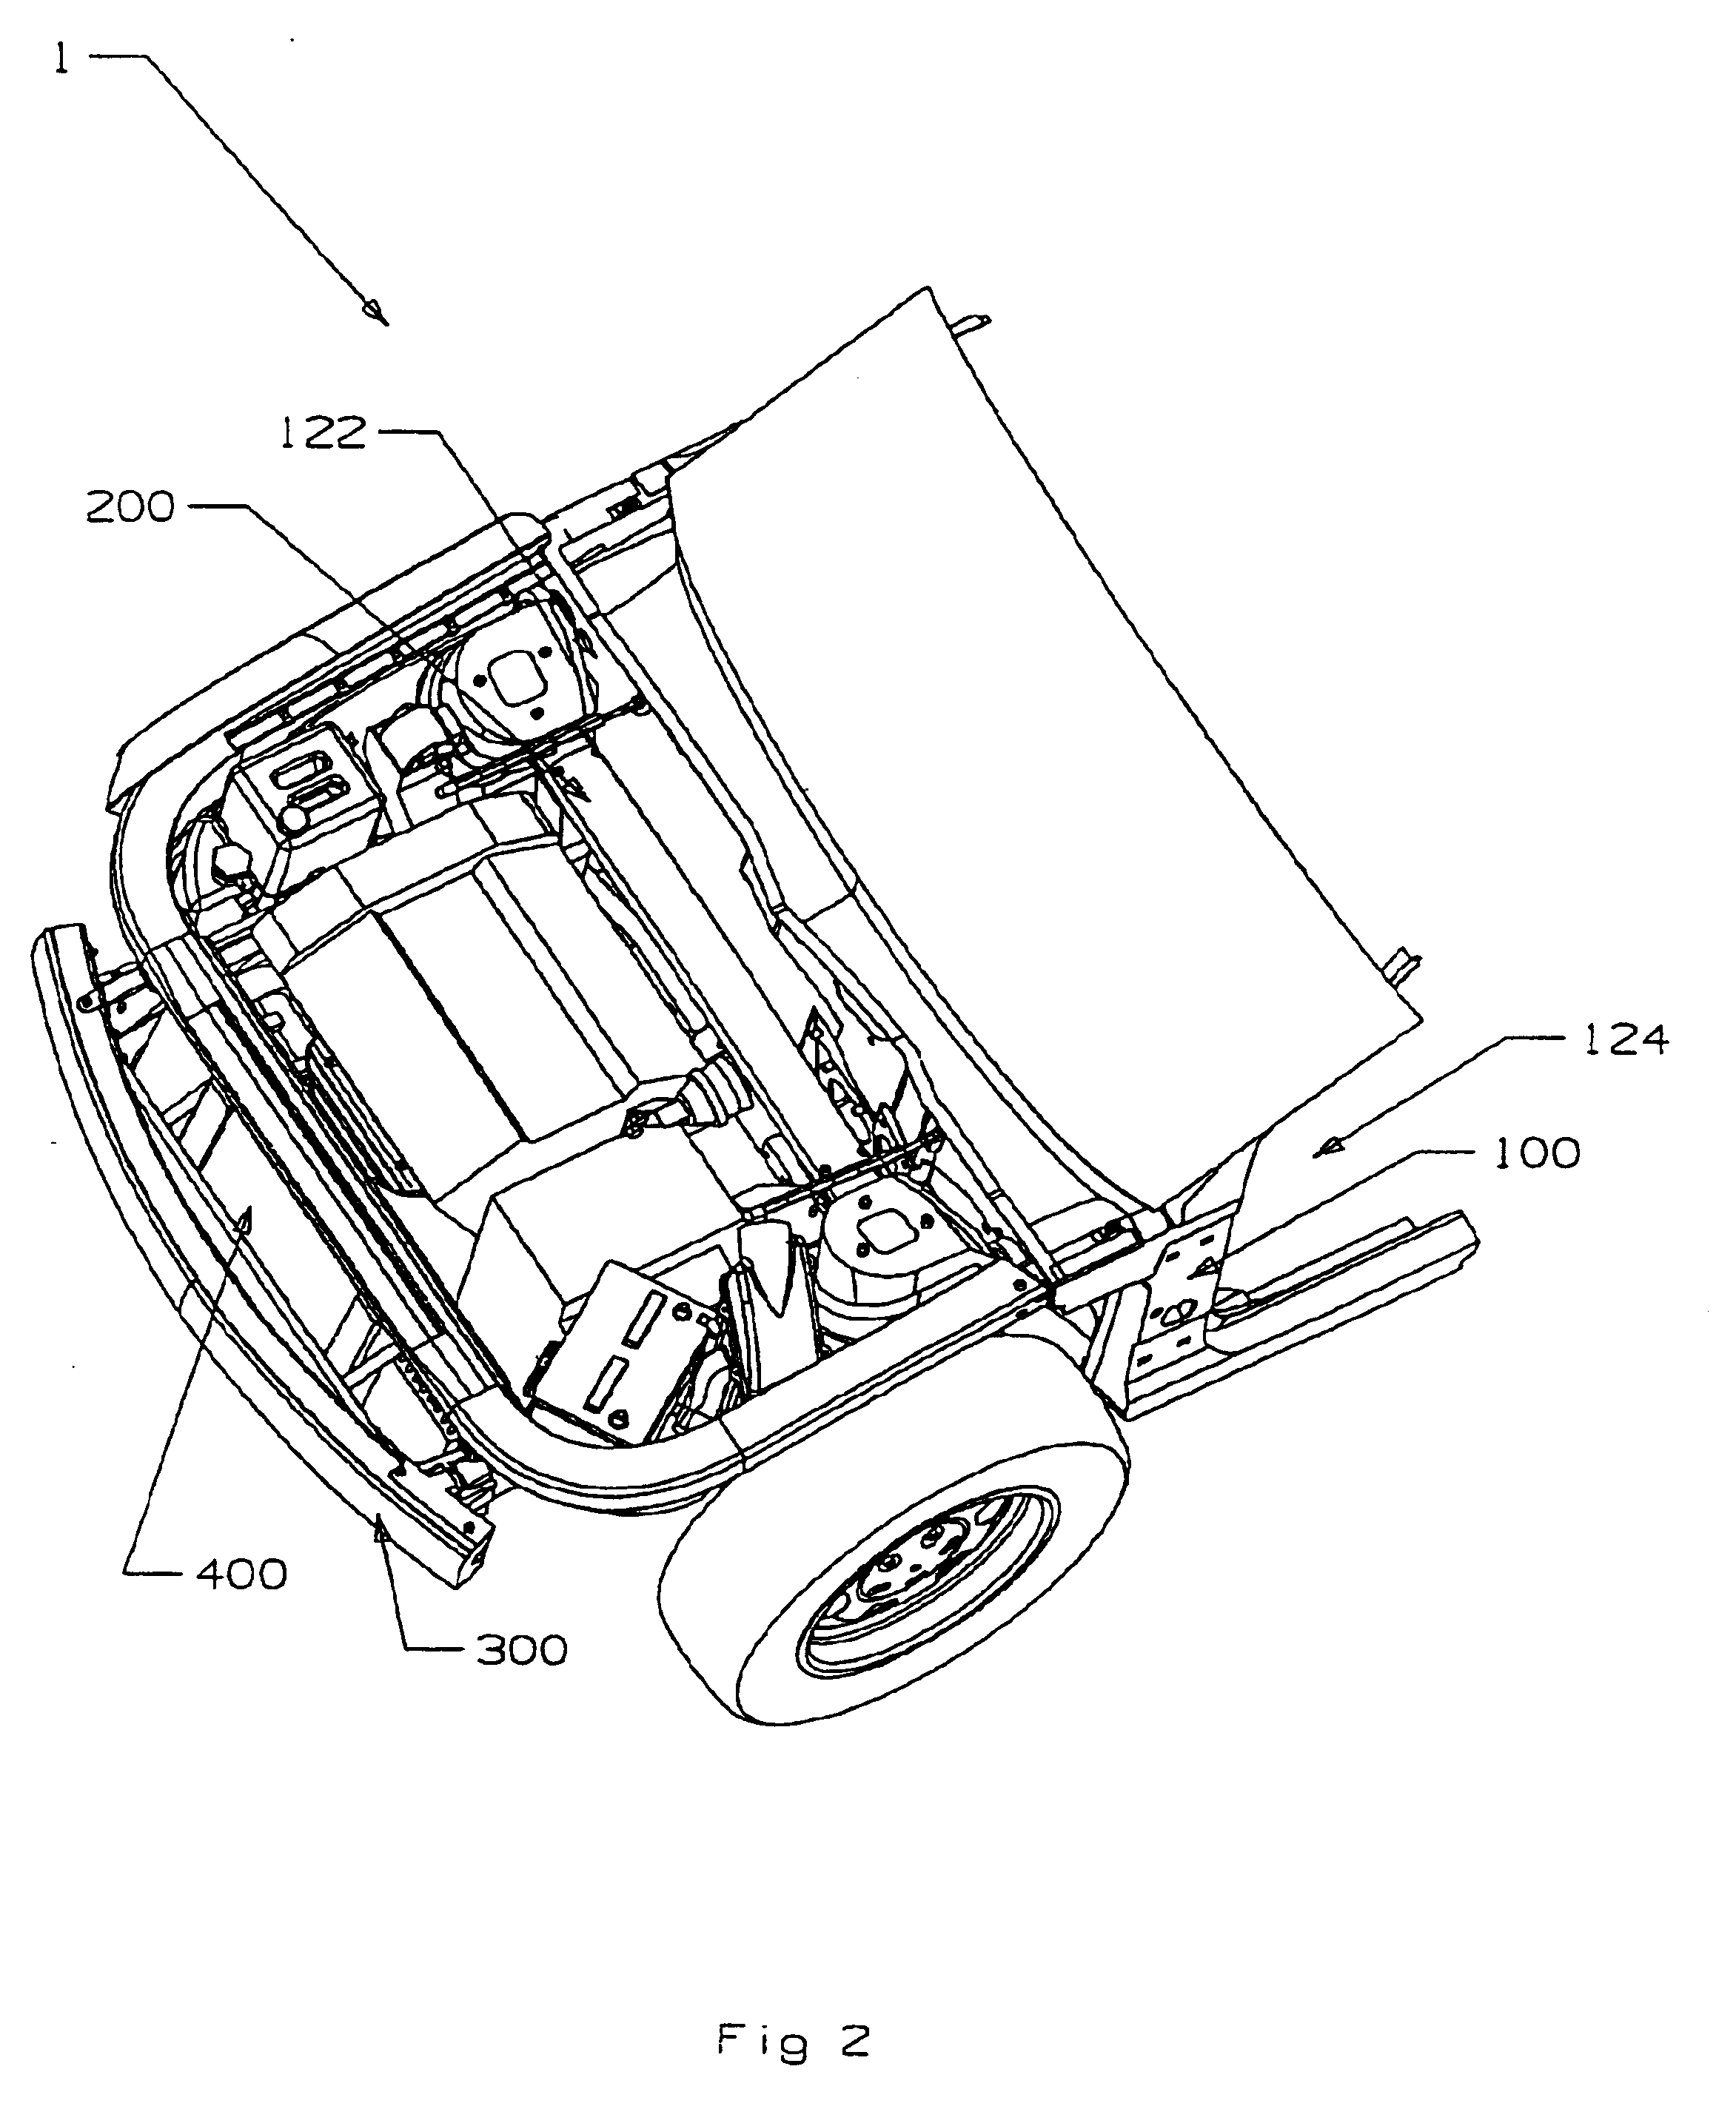 Crash energy absorption assembly for a motor vehicle